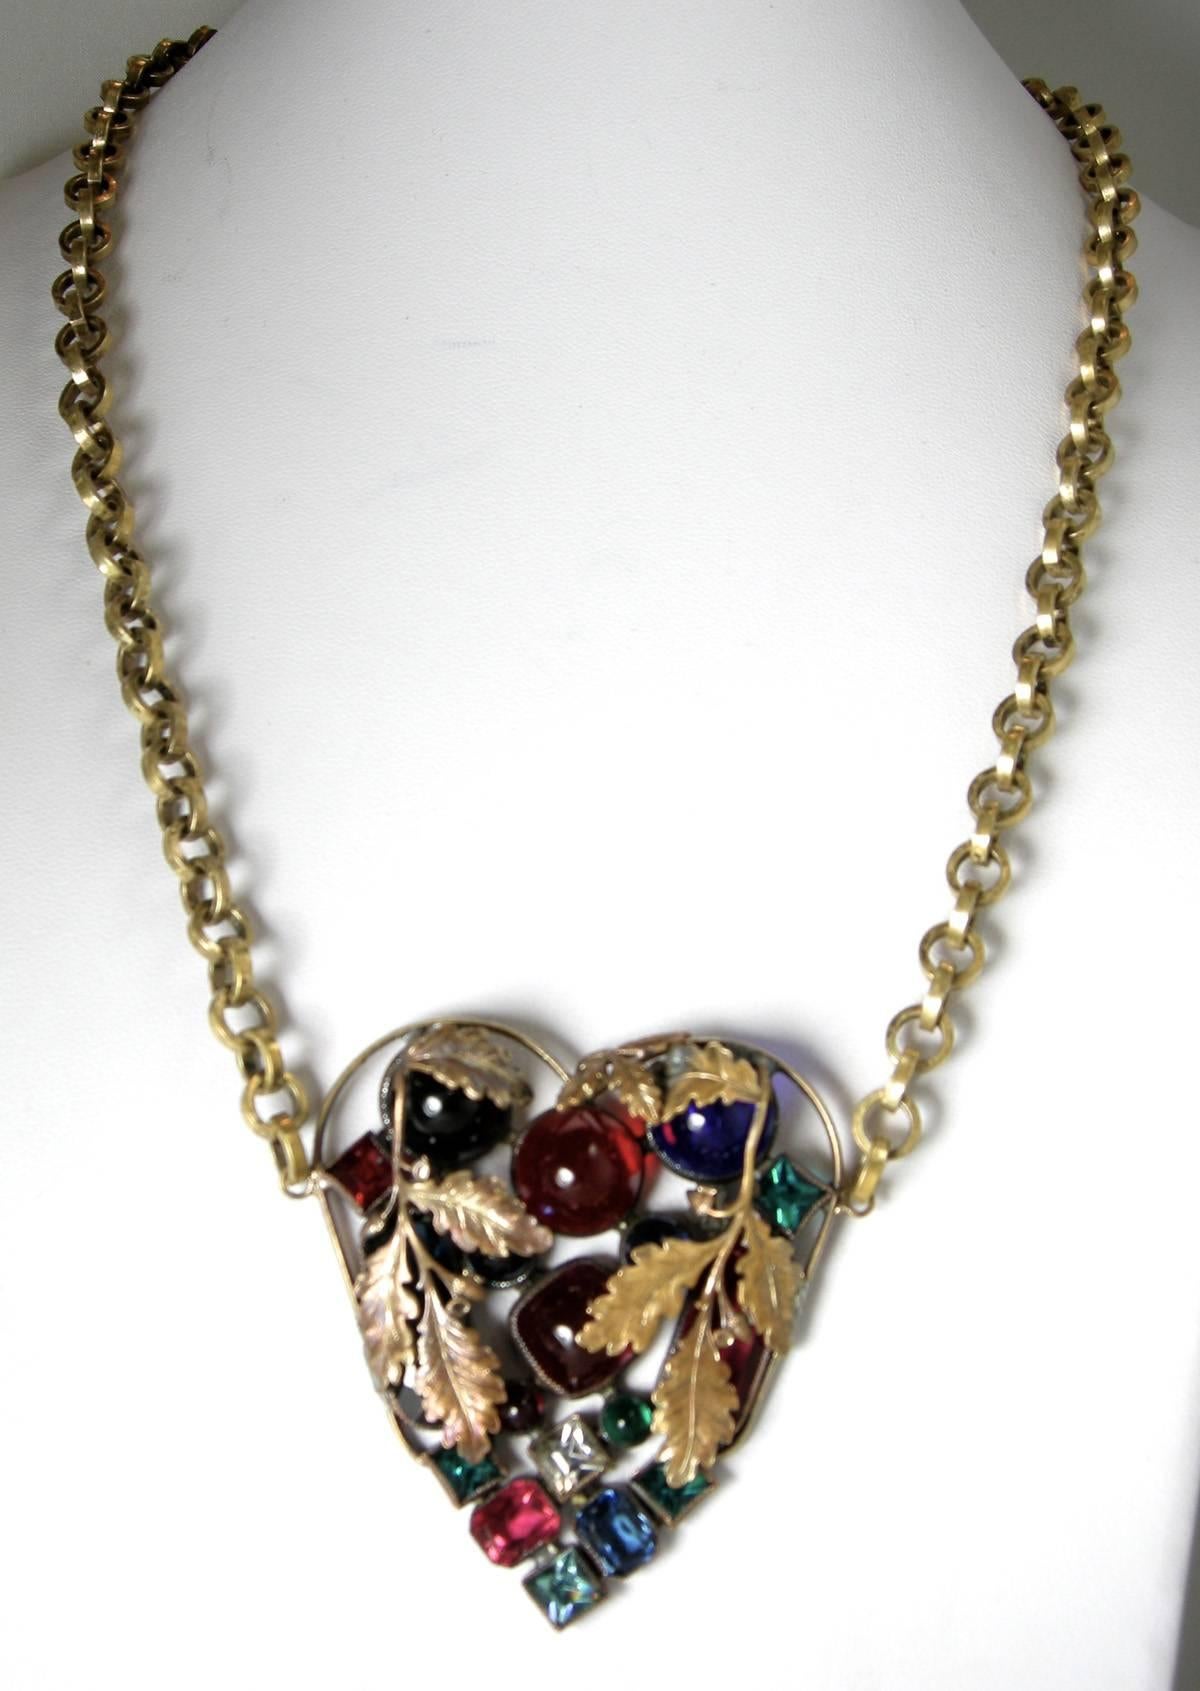 This is a gorgeous Czech heart necklace from the 30s.  It has green, red, blue rhinestone accented with gold-tone leaves overlapping the stones. The chain is 23” long.  The heart measures 2-1/2” x 2-1/4” and has a spring back clasp.  This necklace